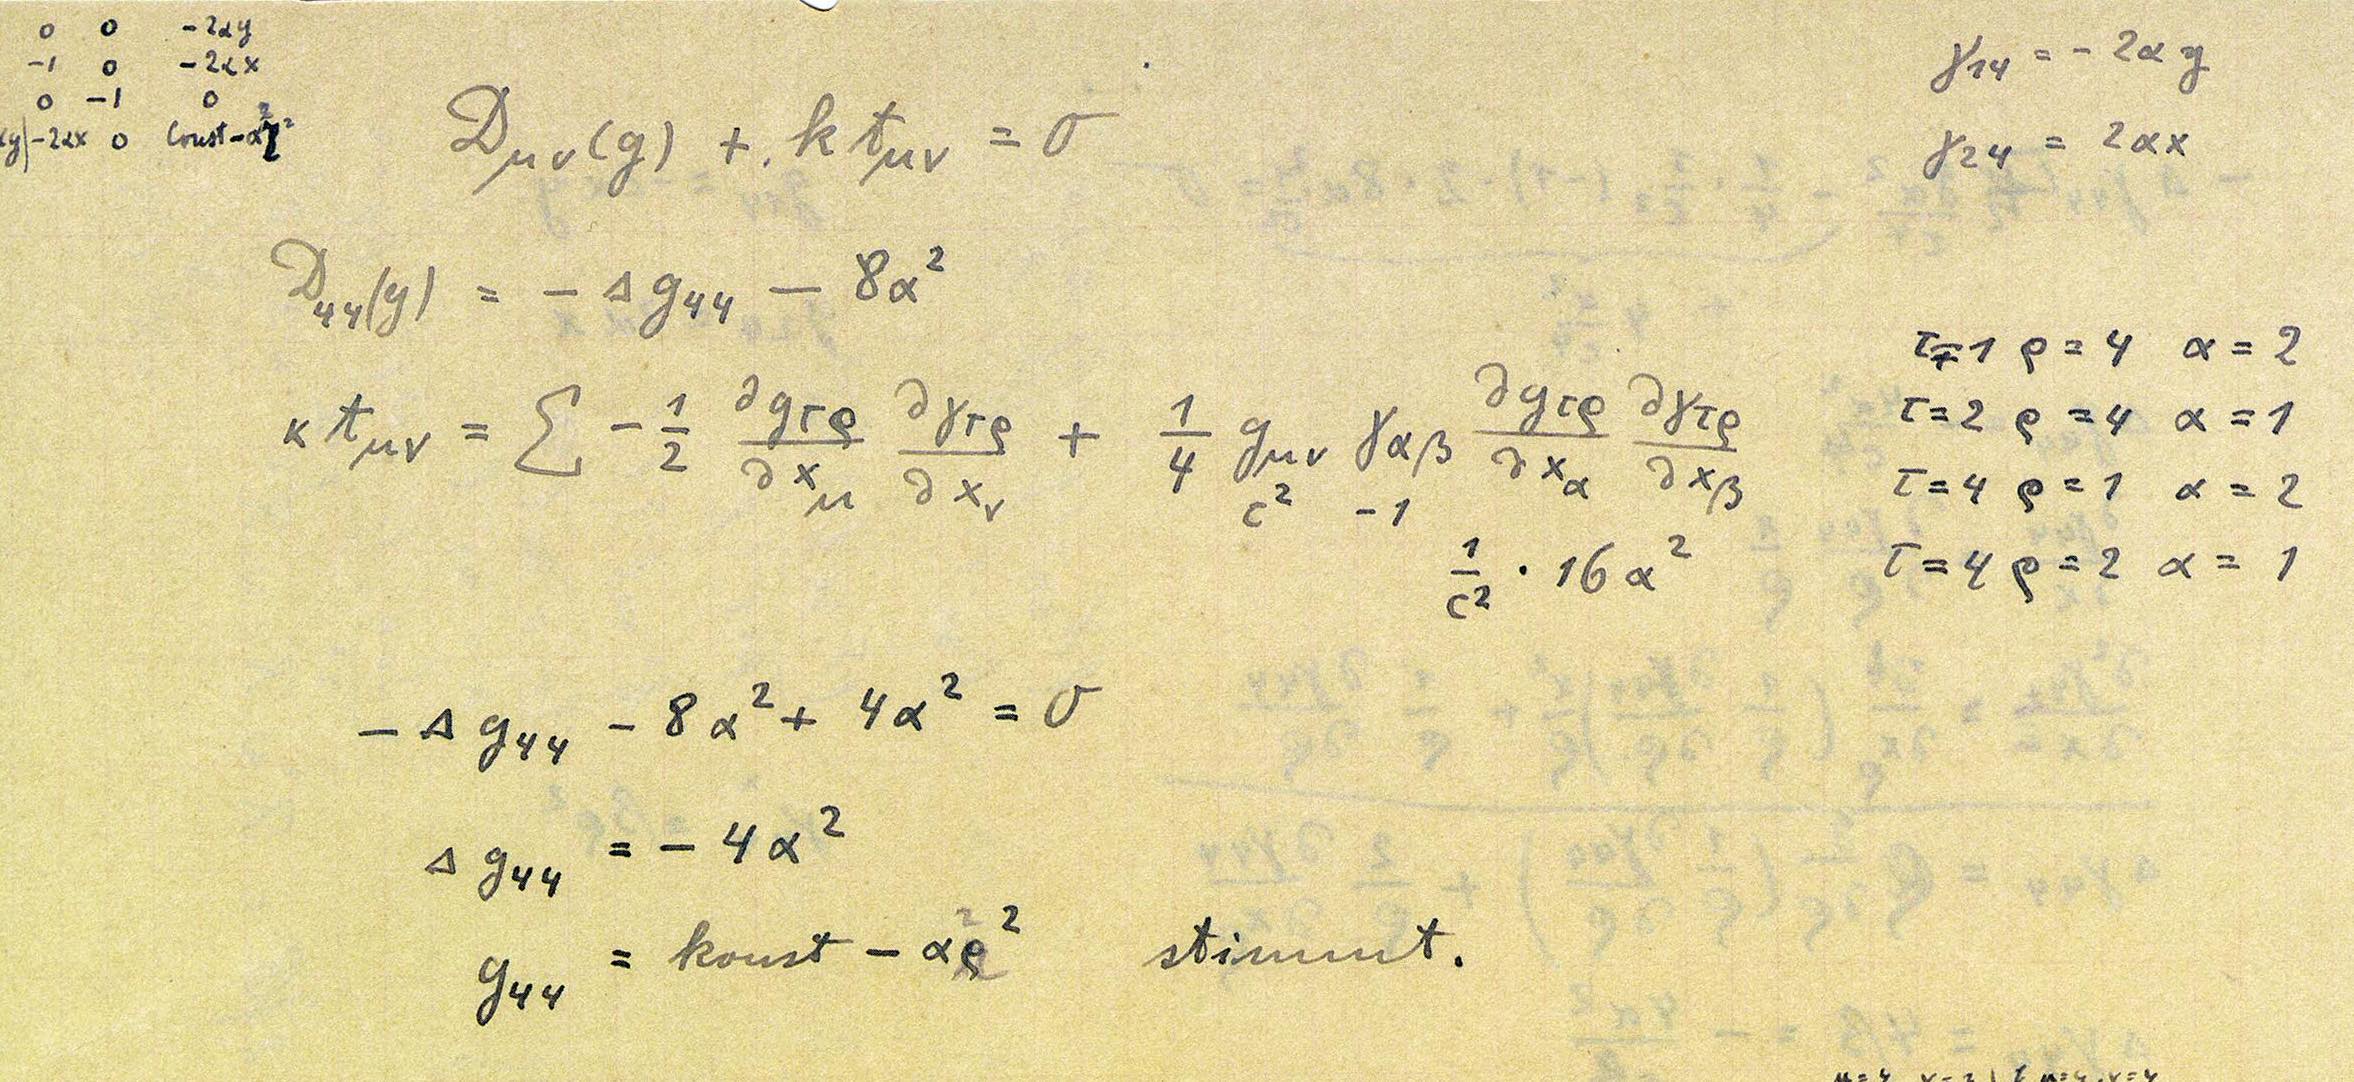 equation from the manuscript